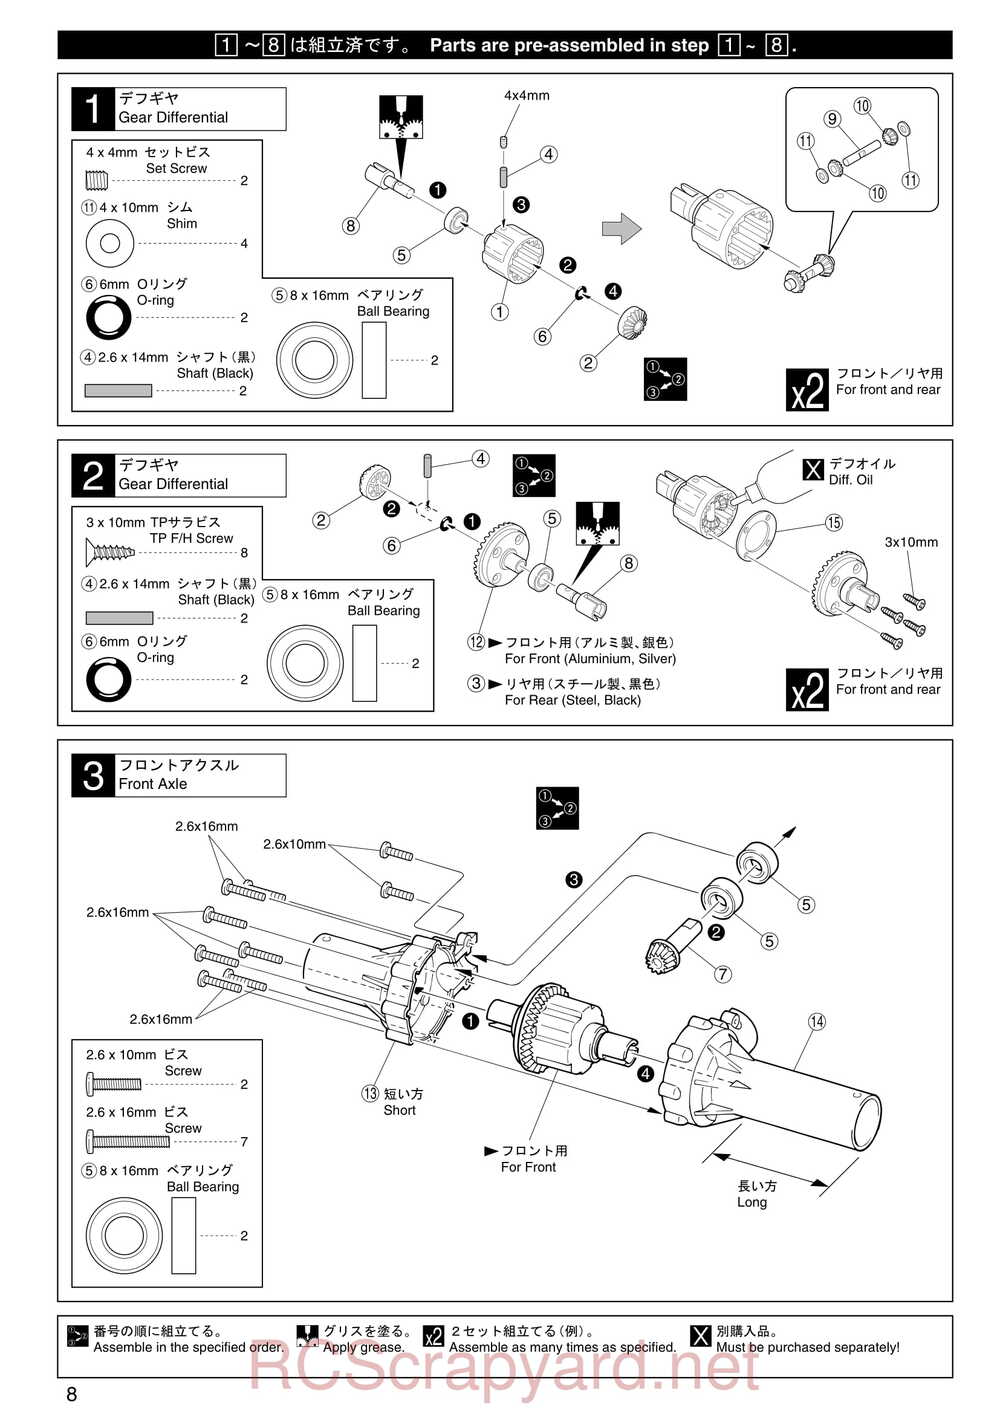 Kyosho - 31224 - Mad-Armour - Manual - Page 08